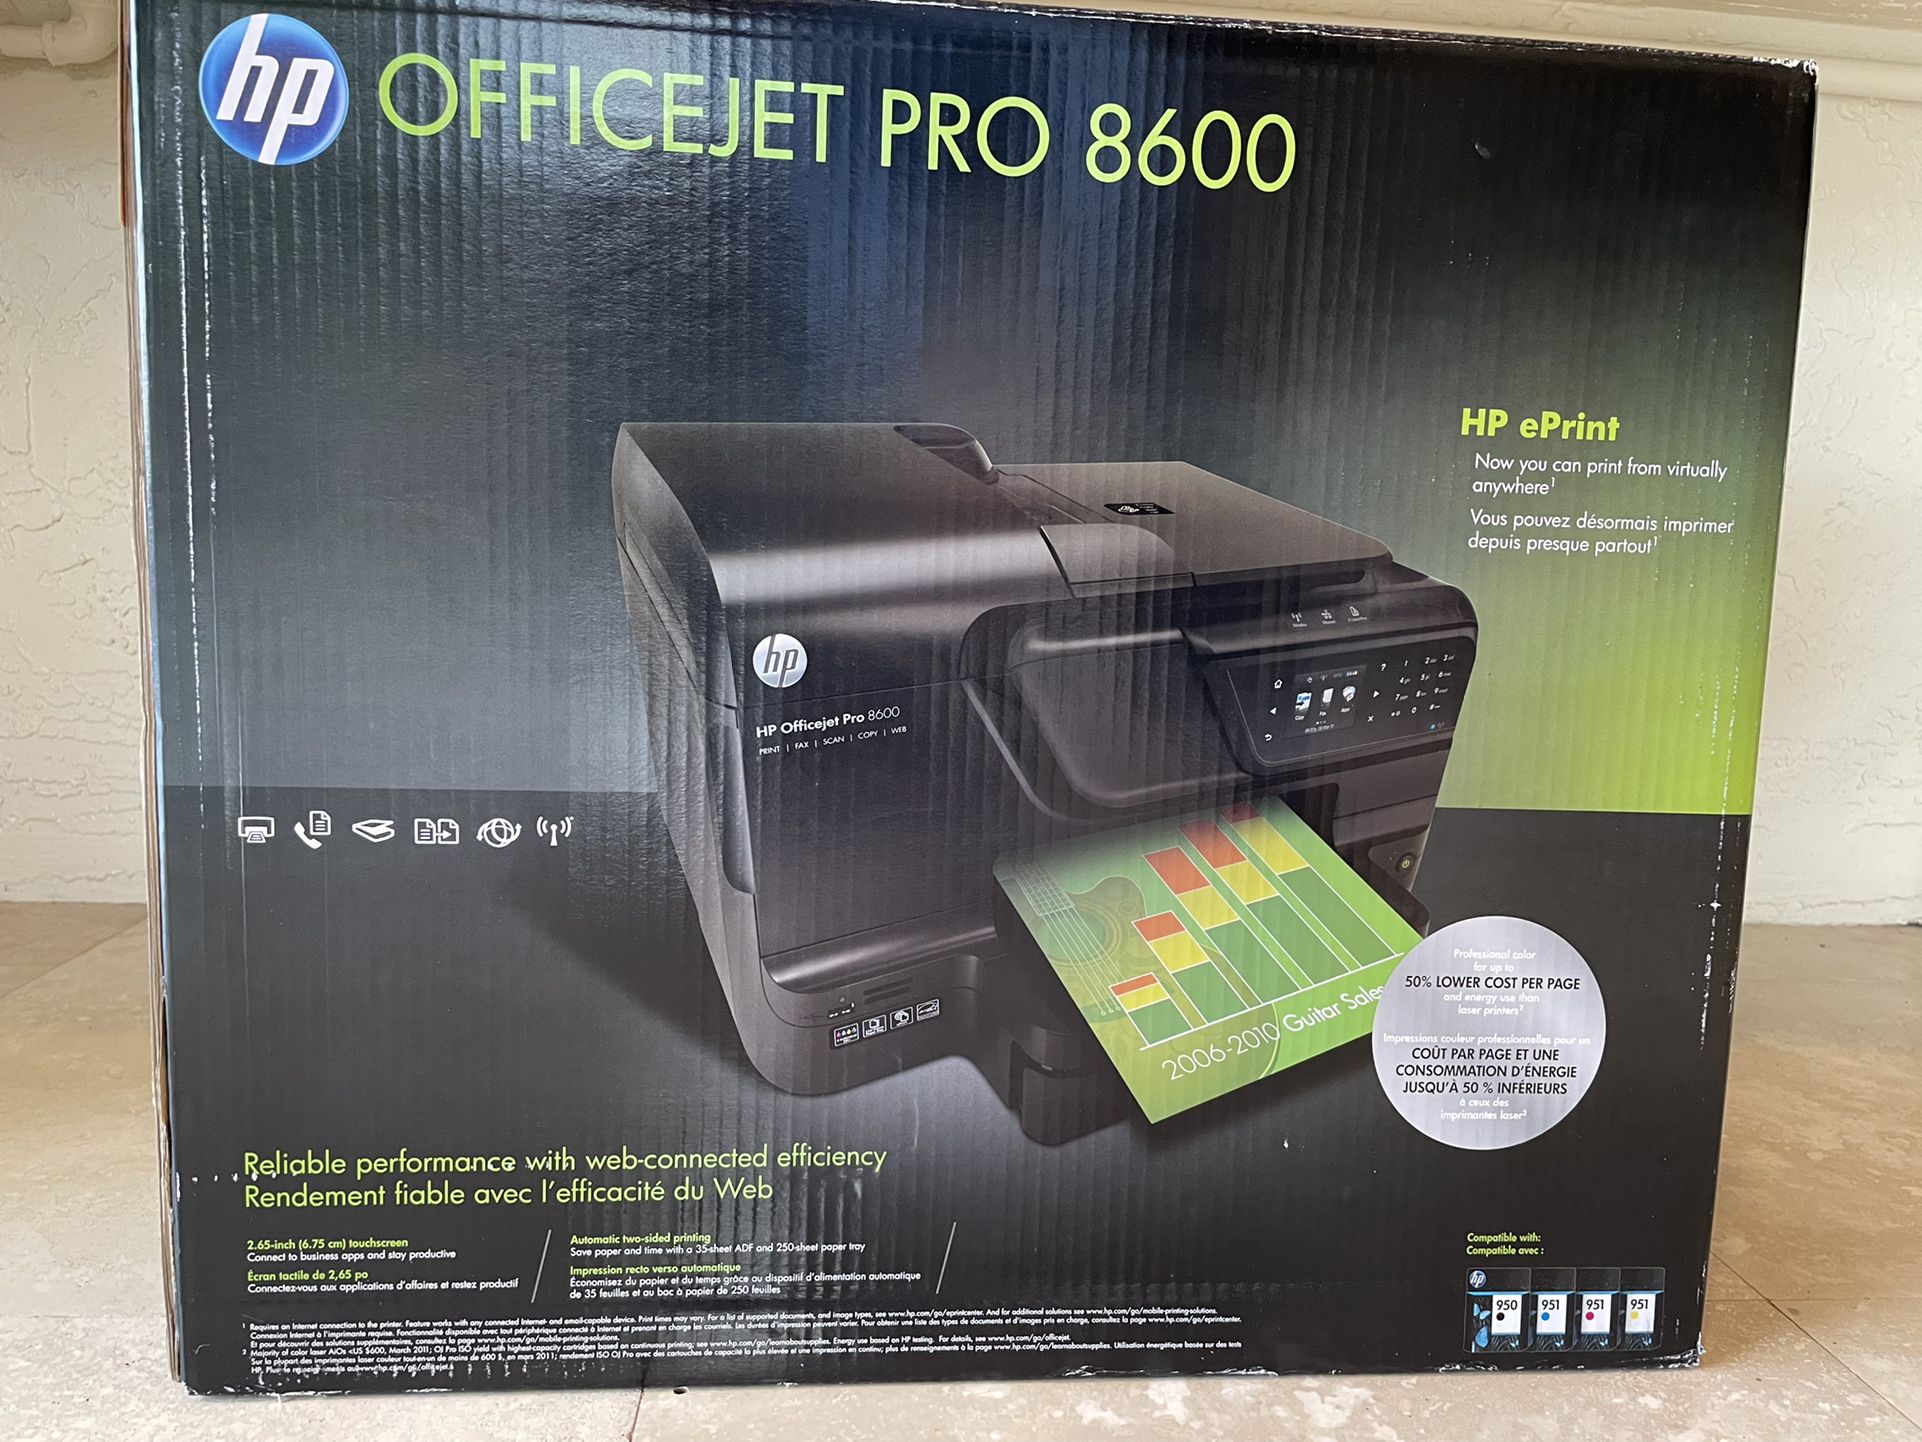 HP OfficeJet Pro 8730 for Sale in New York, NY - OfferUp